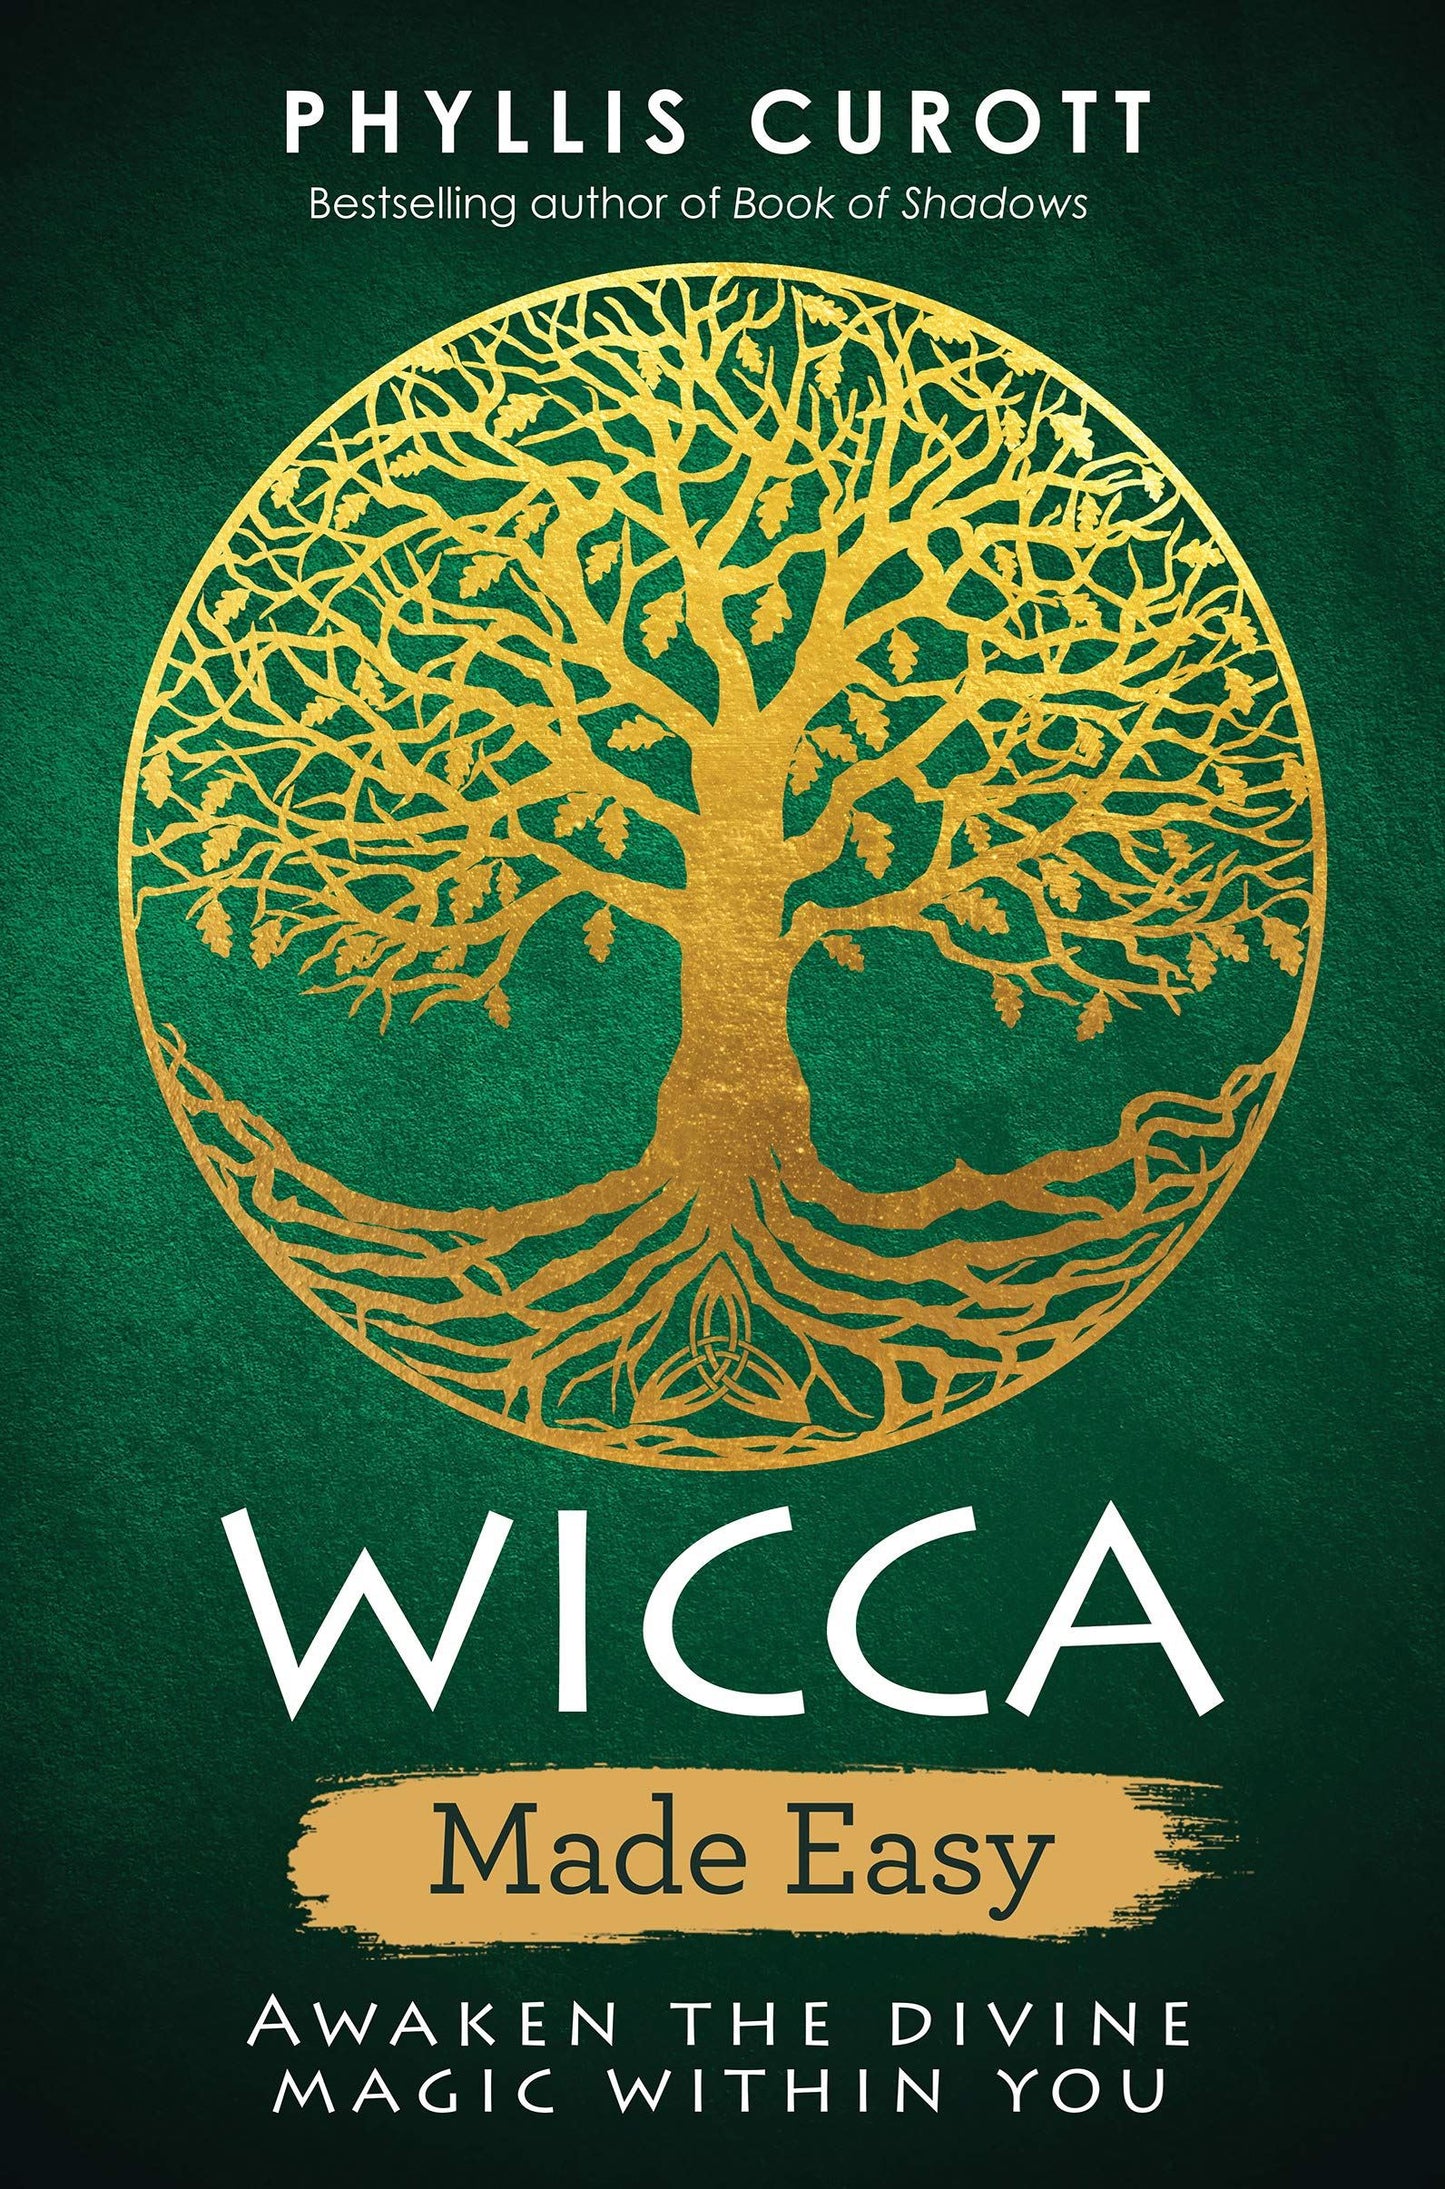 Wicca Made Easy by Phyllis Curot